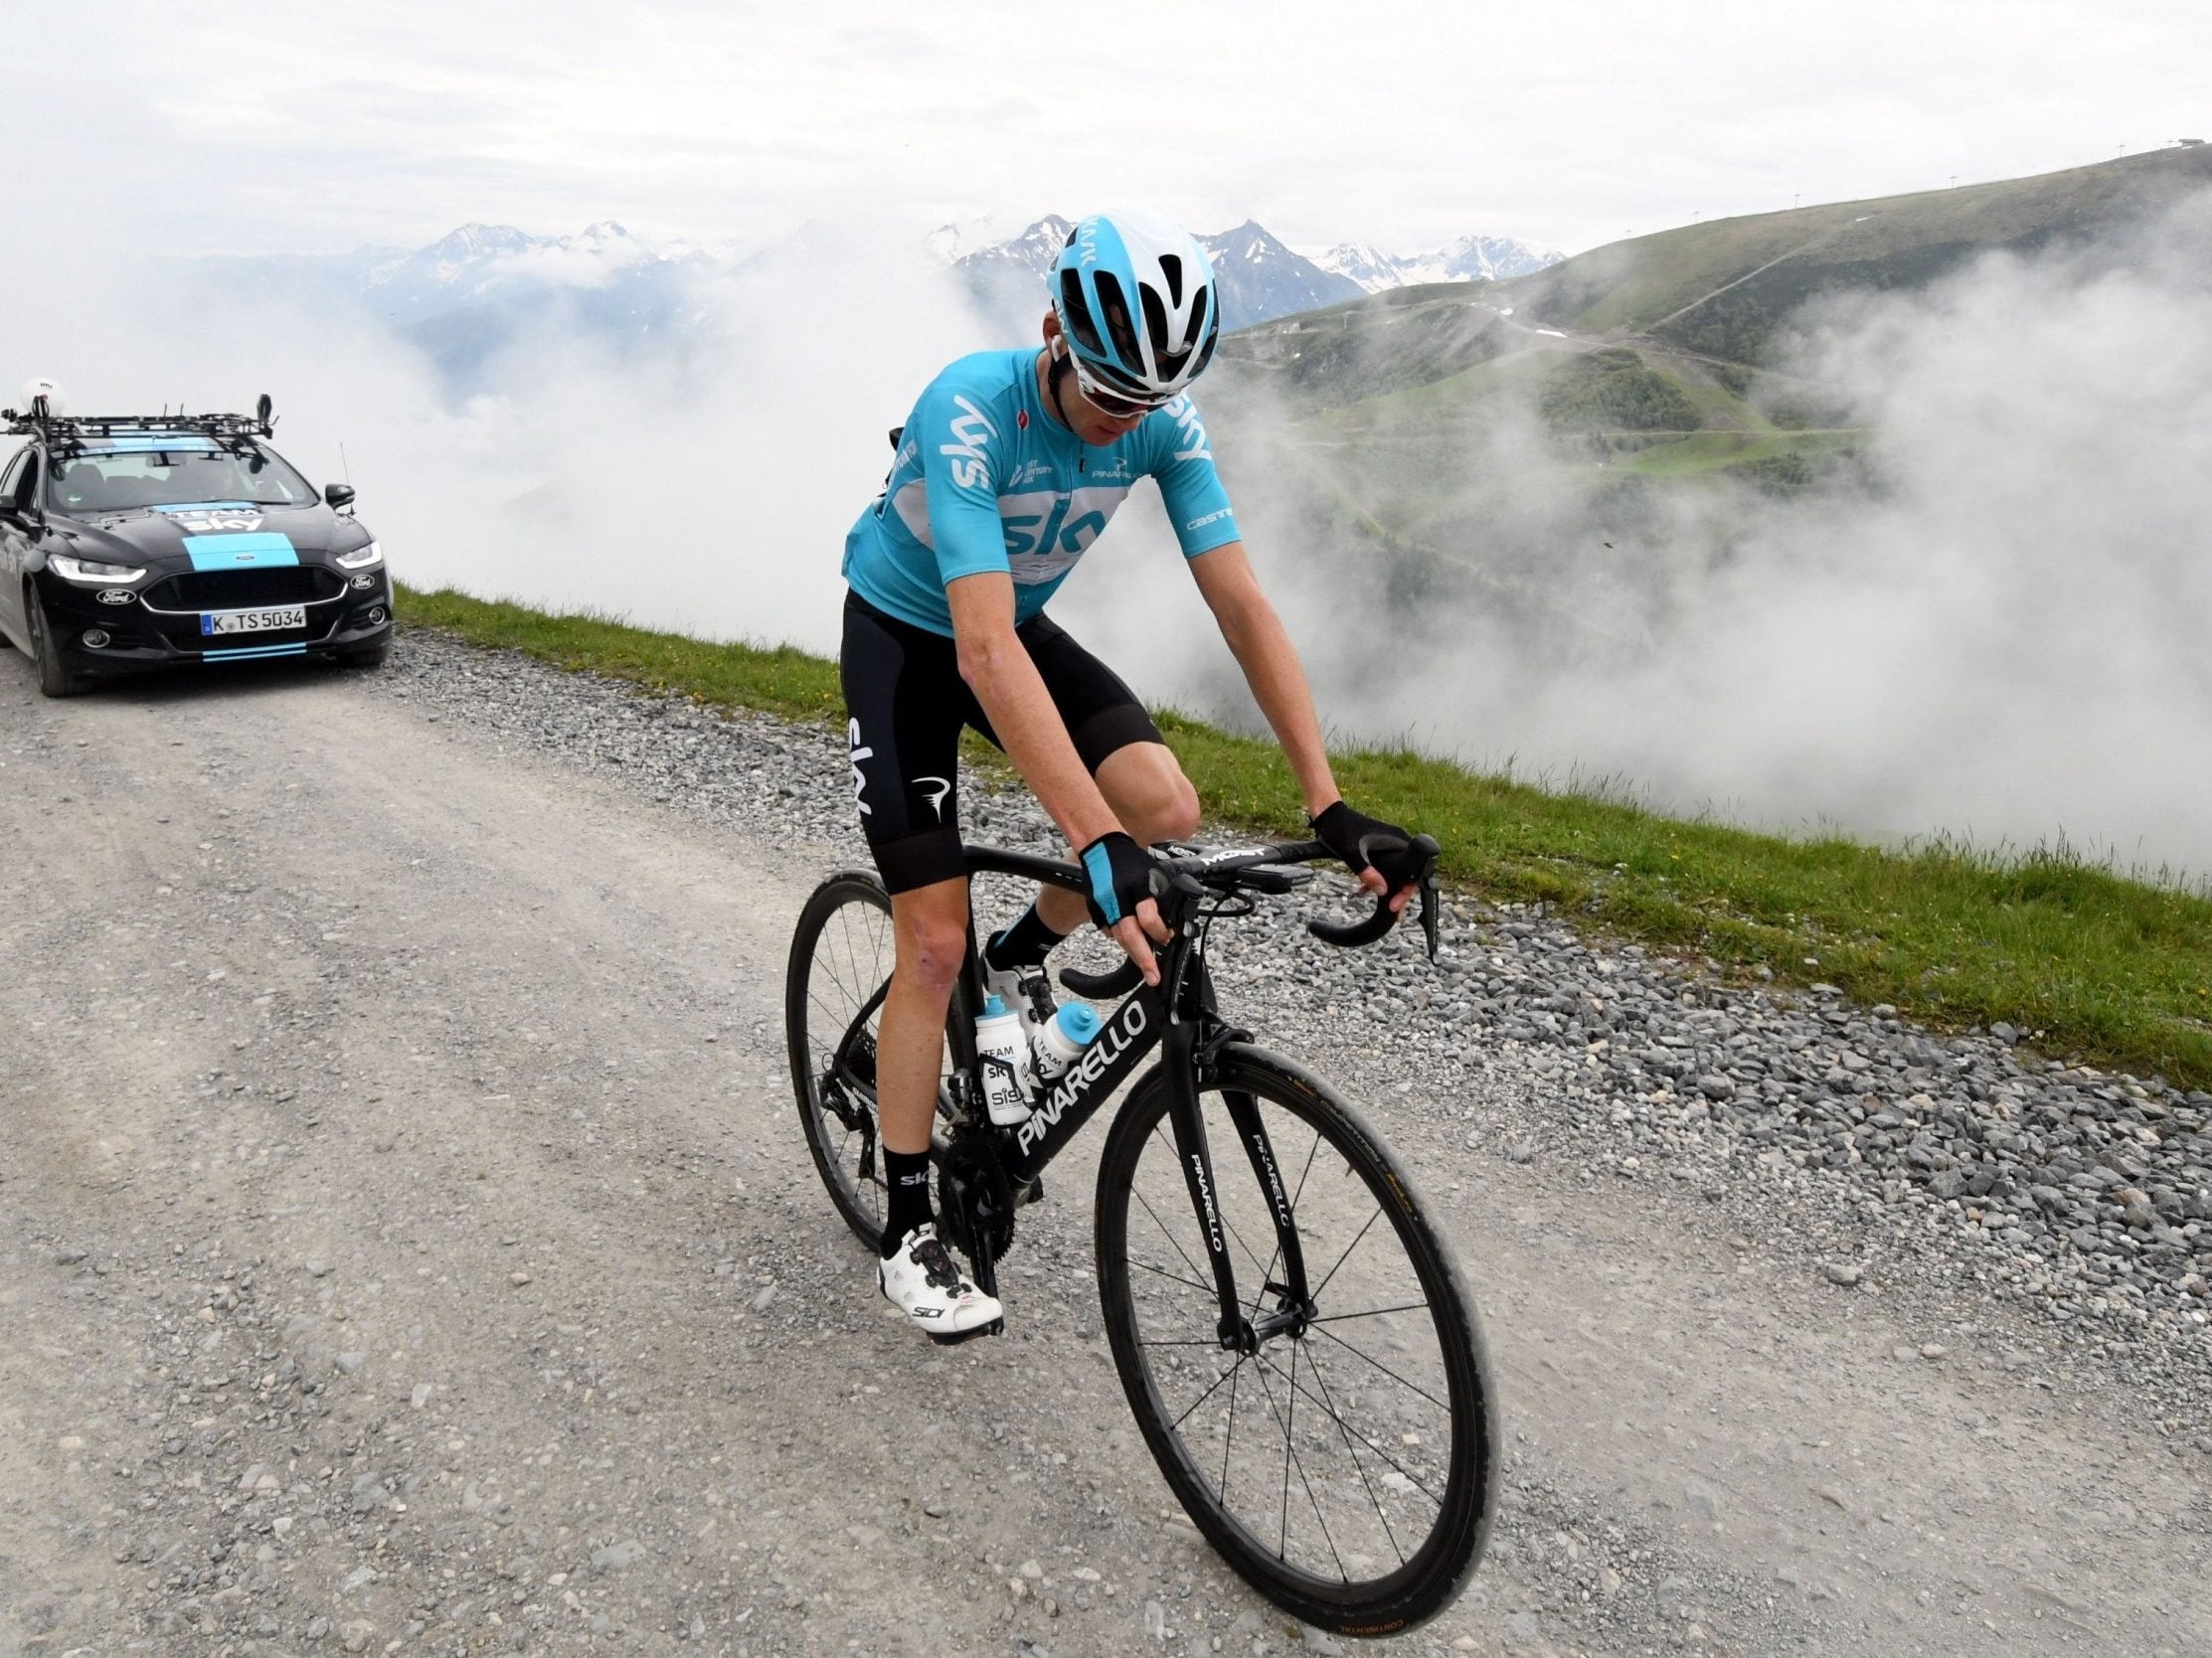 Chris Froome remains under investigation for returning excessive levels of the asthma drug Salbutamol following a urine sample at last September's Vuelta a Espana